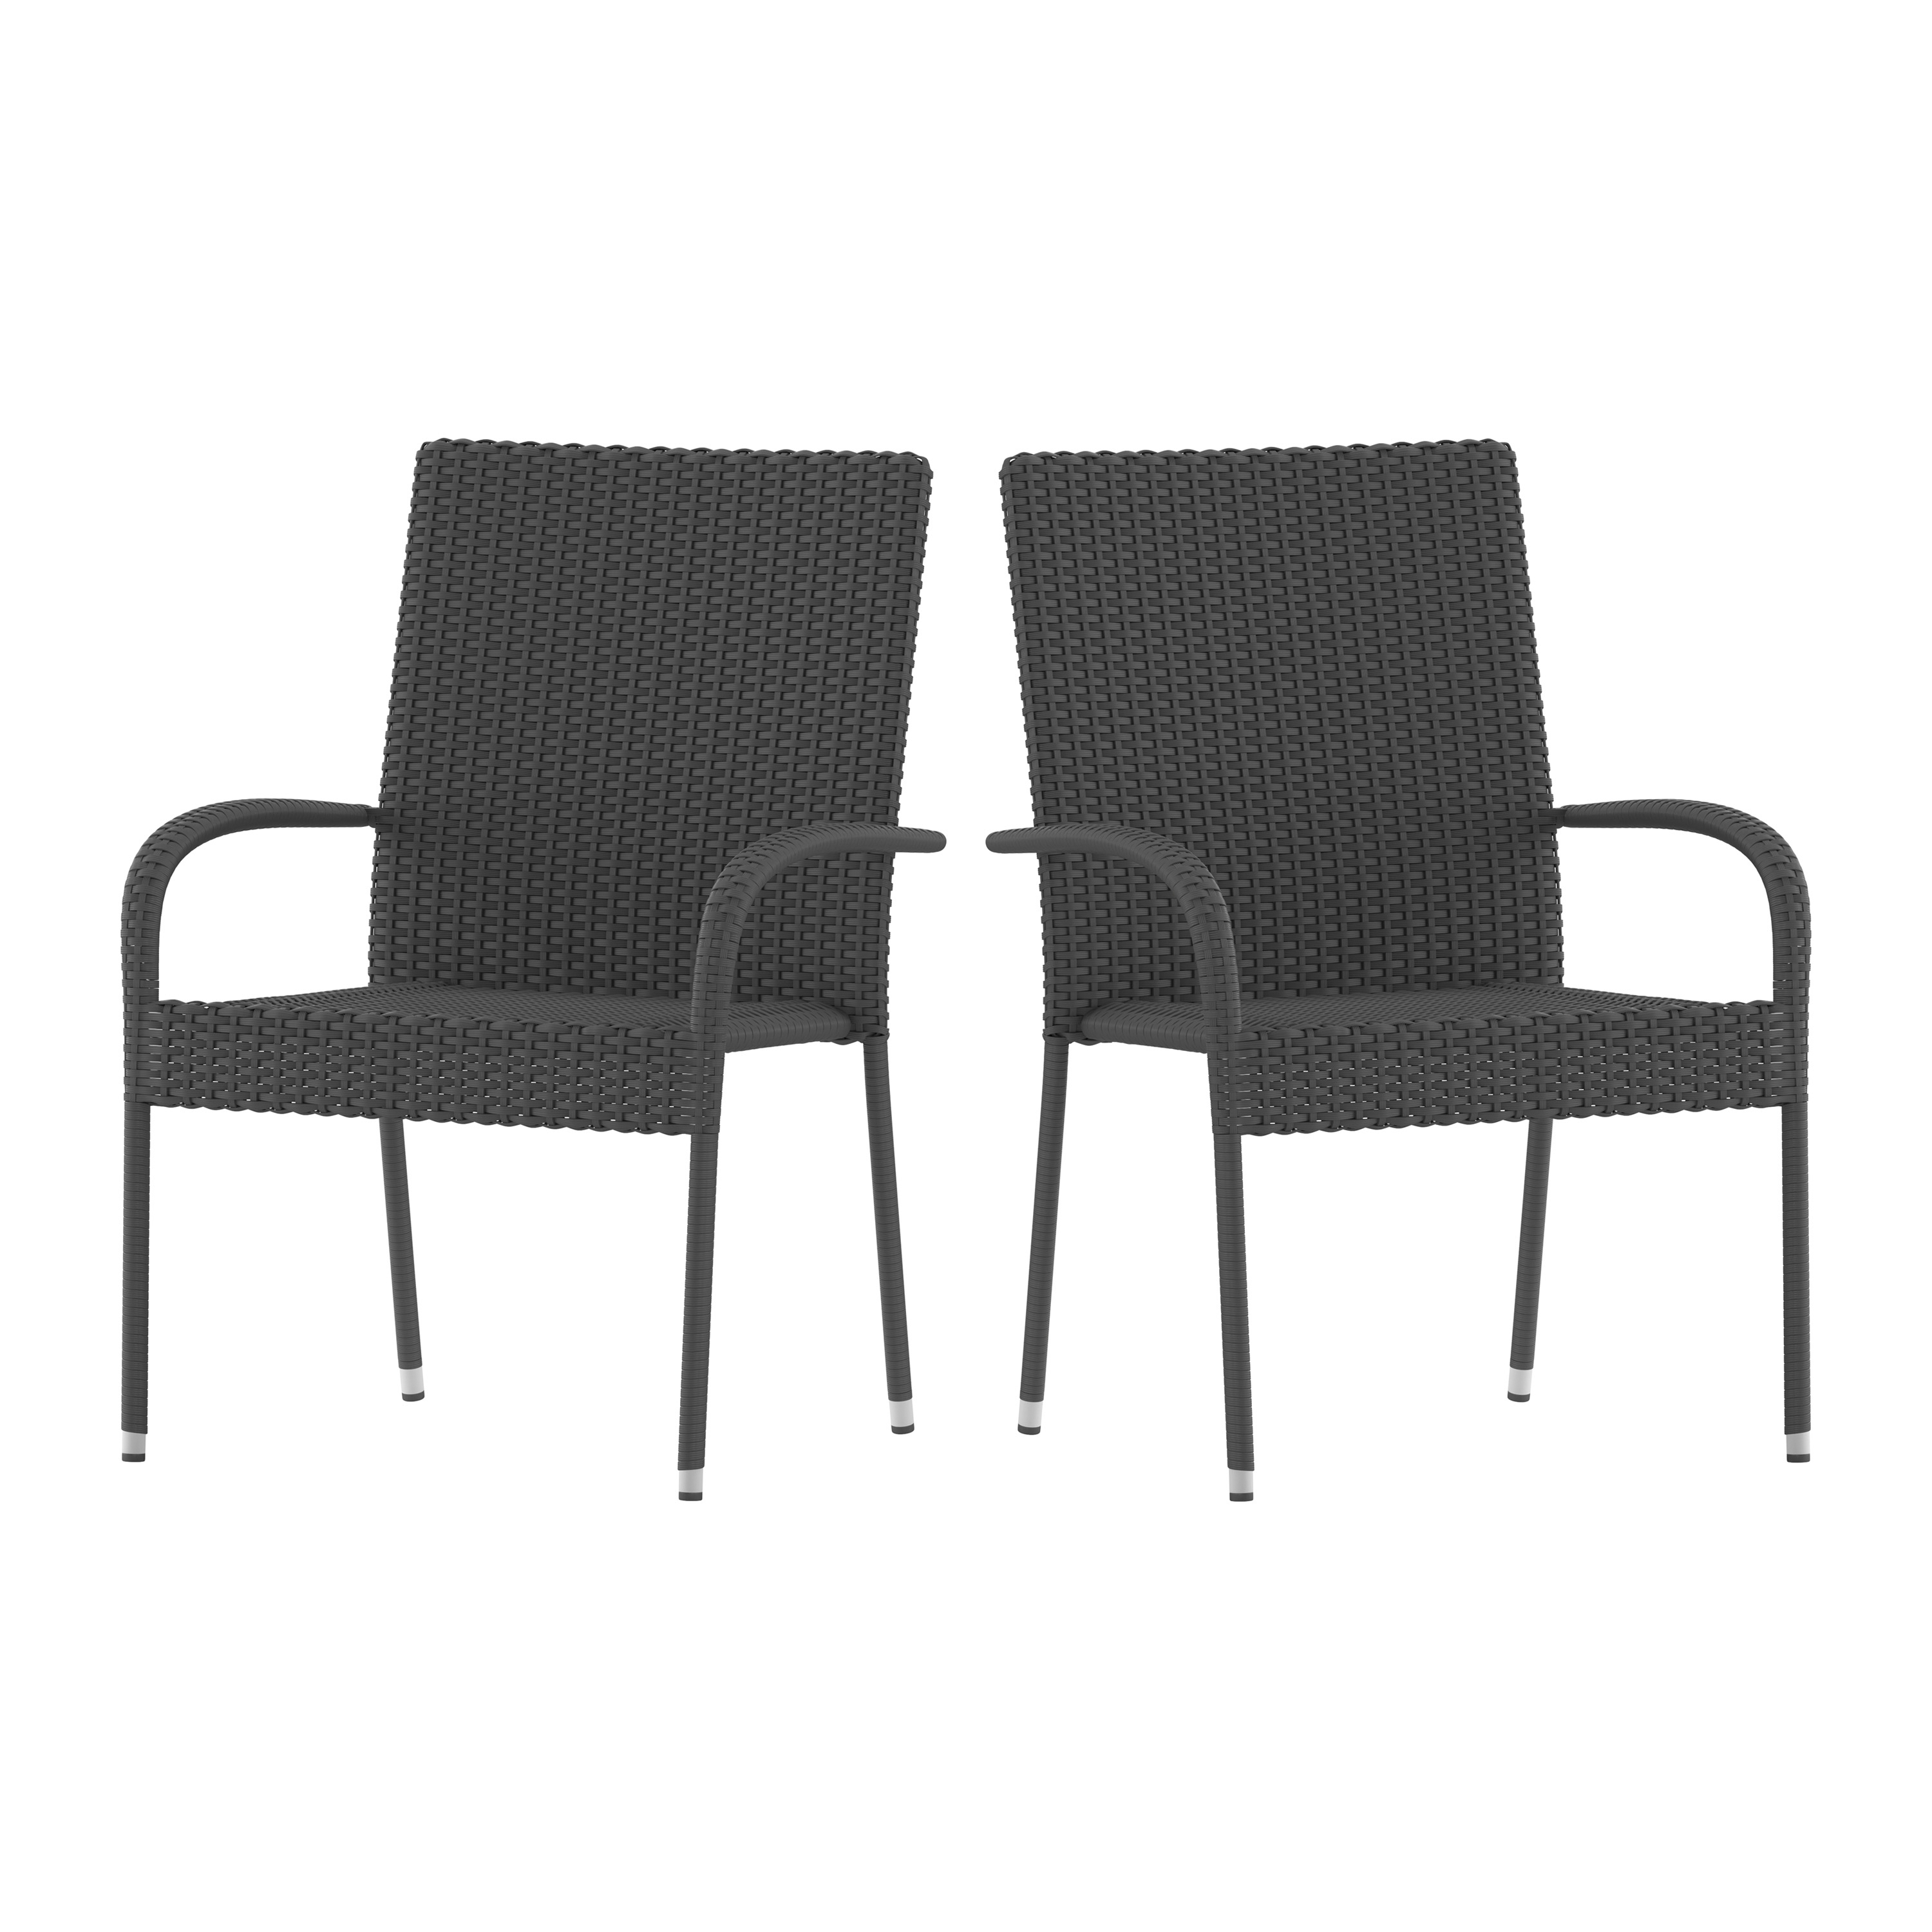 Flash Furniture 2-TW-3WBE073-GY-GG Stackable Indoor/Outdoor Gray Wicker Dining Chair with Arms with Steel Frame, Set of 2